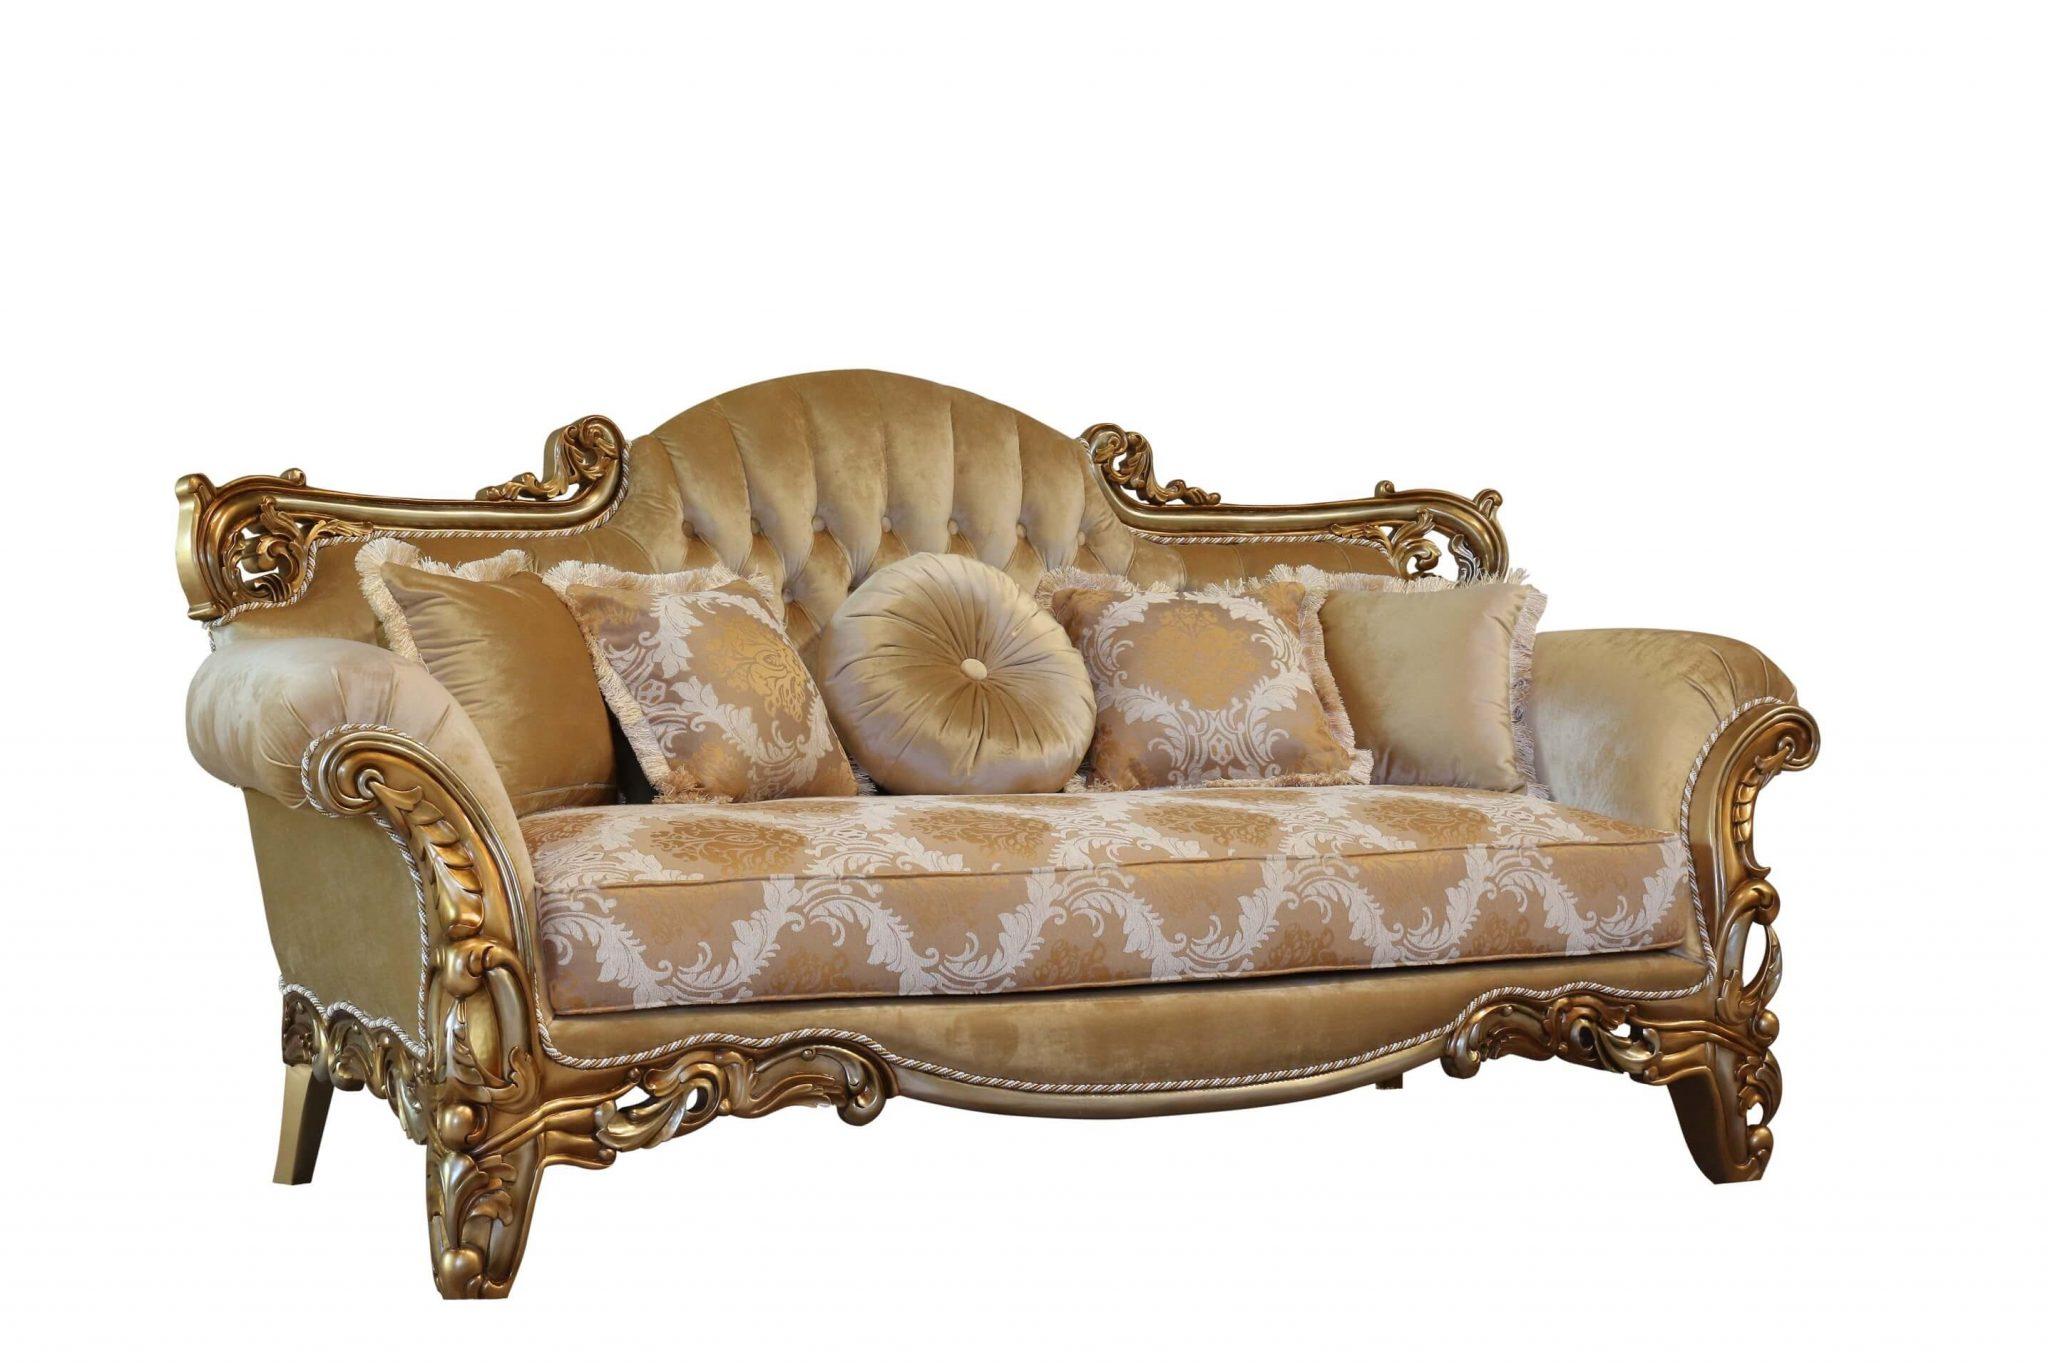 Classic, Traditional Sofa ALEXSANDRA 43553-S in Silver, Gold, Brown Fabric